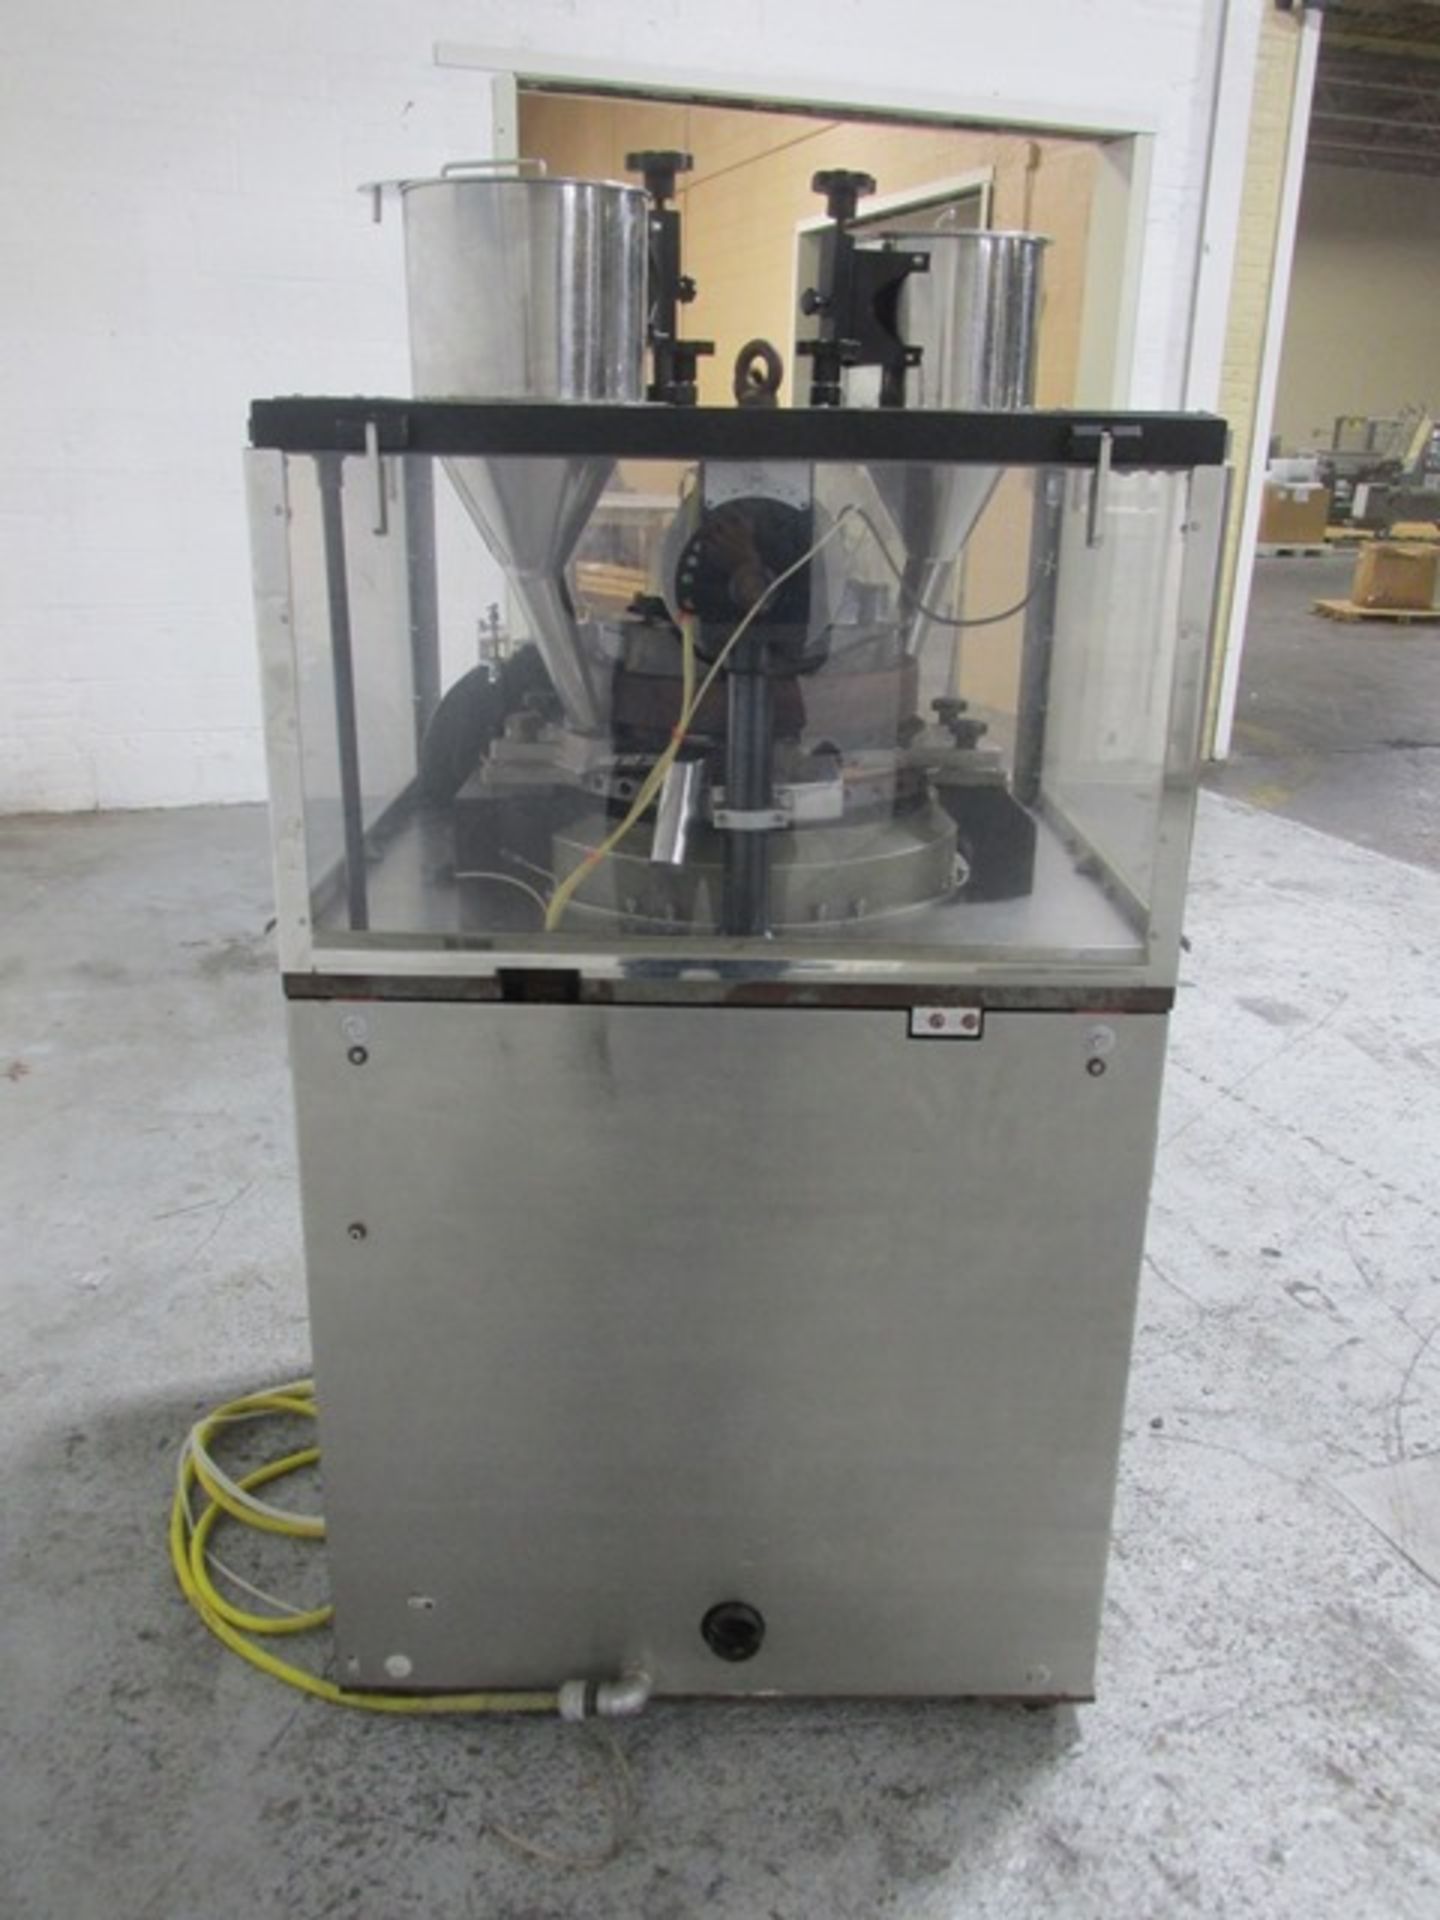 Manesty press rotary tablet press, model BB4, 35 station, 6.5 ton compression pressure, - Image 3 of 18